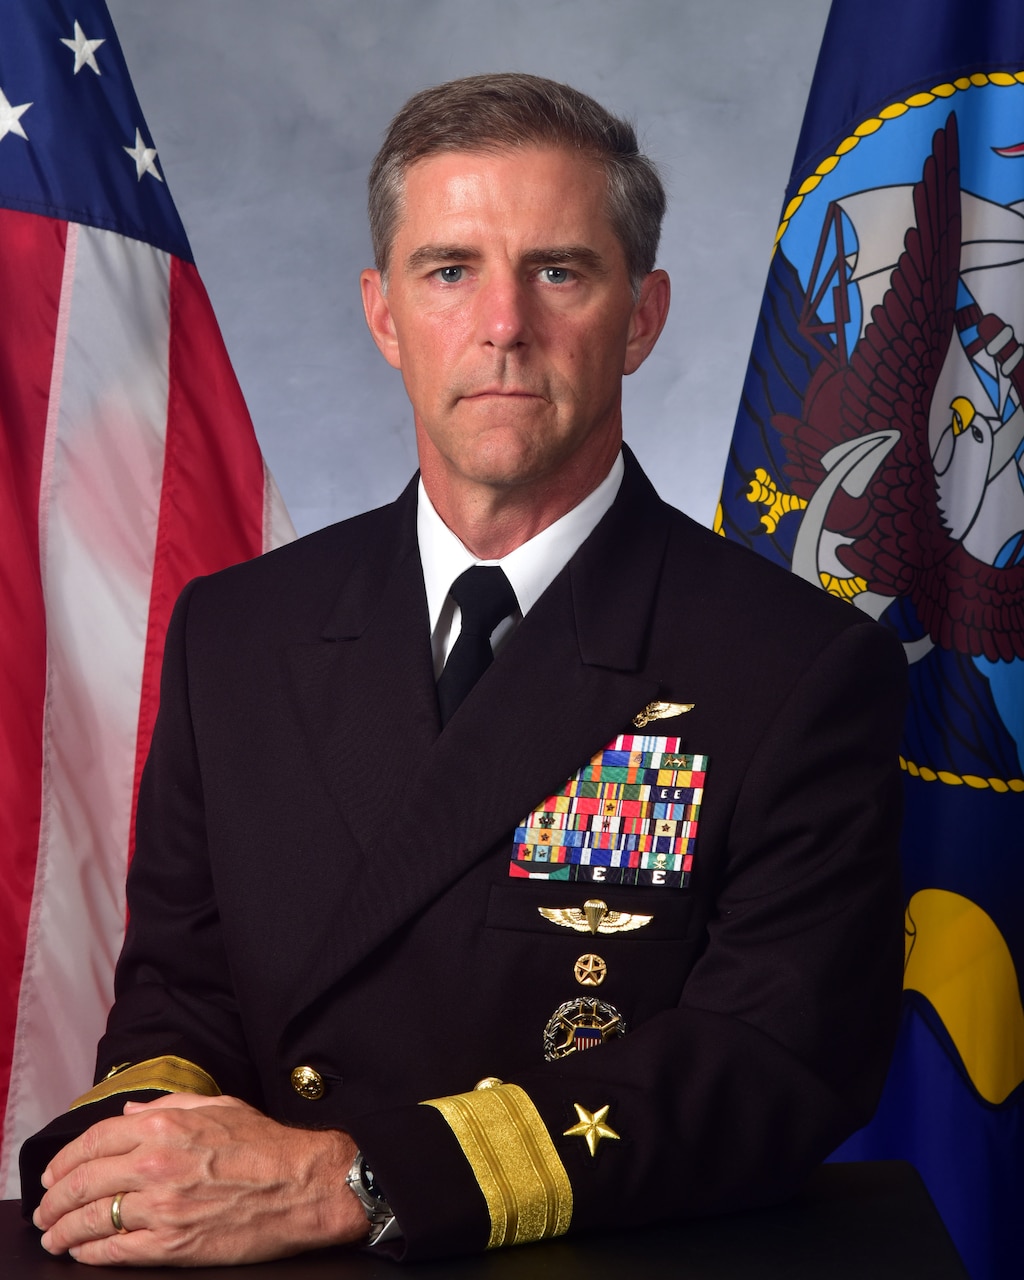 Official studio photo of Rear Adm. Marc Miguez, Commander, Carrier Strike Group 2